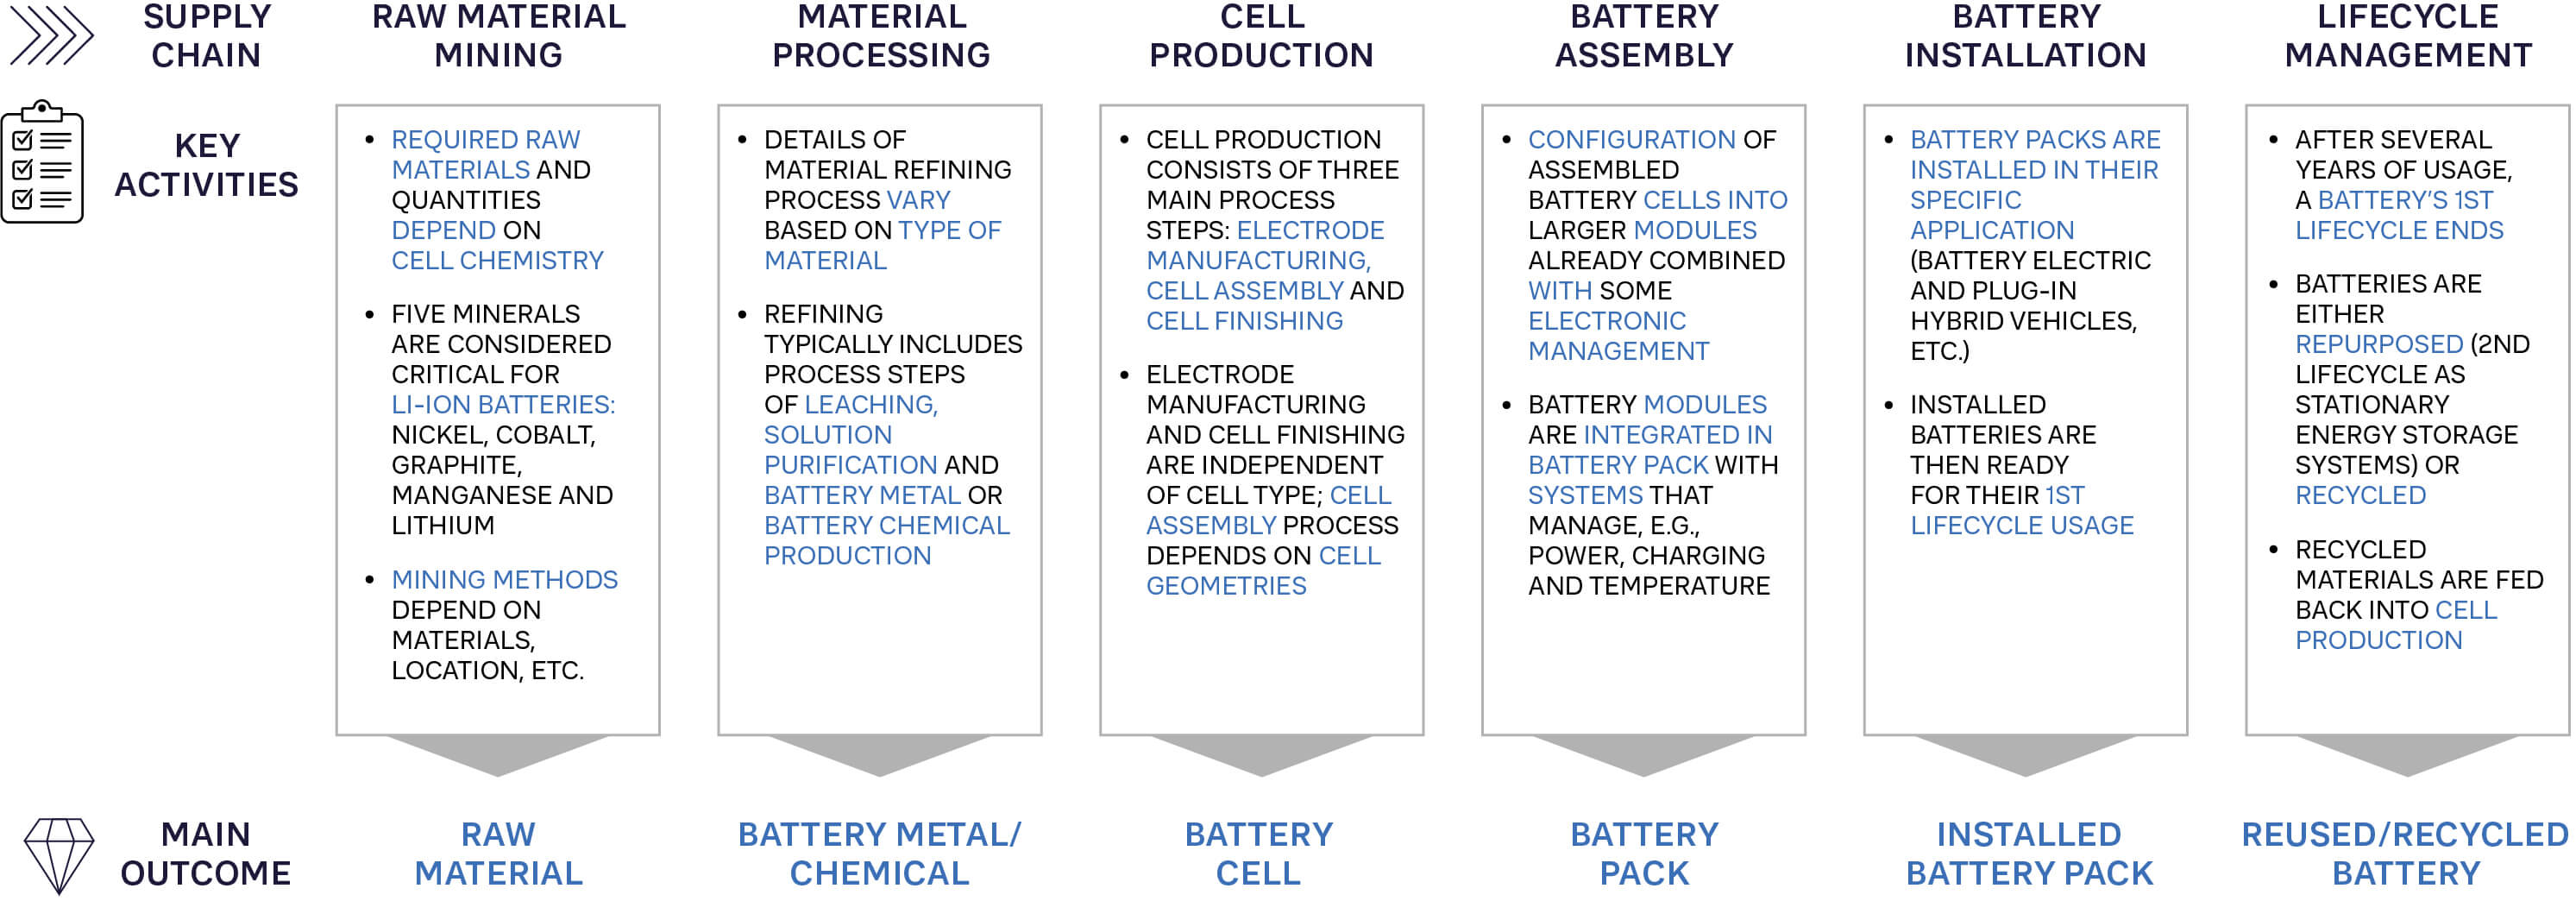 Electric Vehicle Battery Supply Chains: The Basics